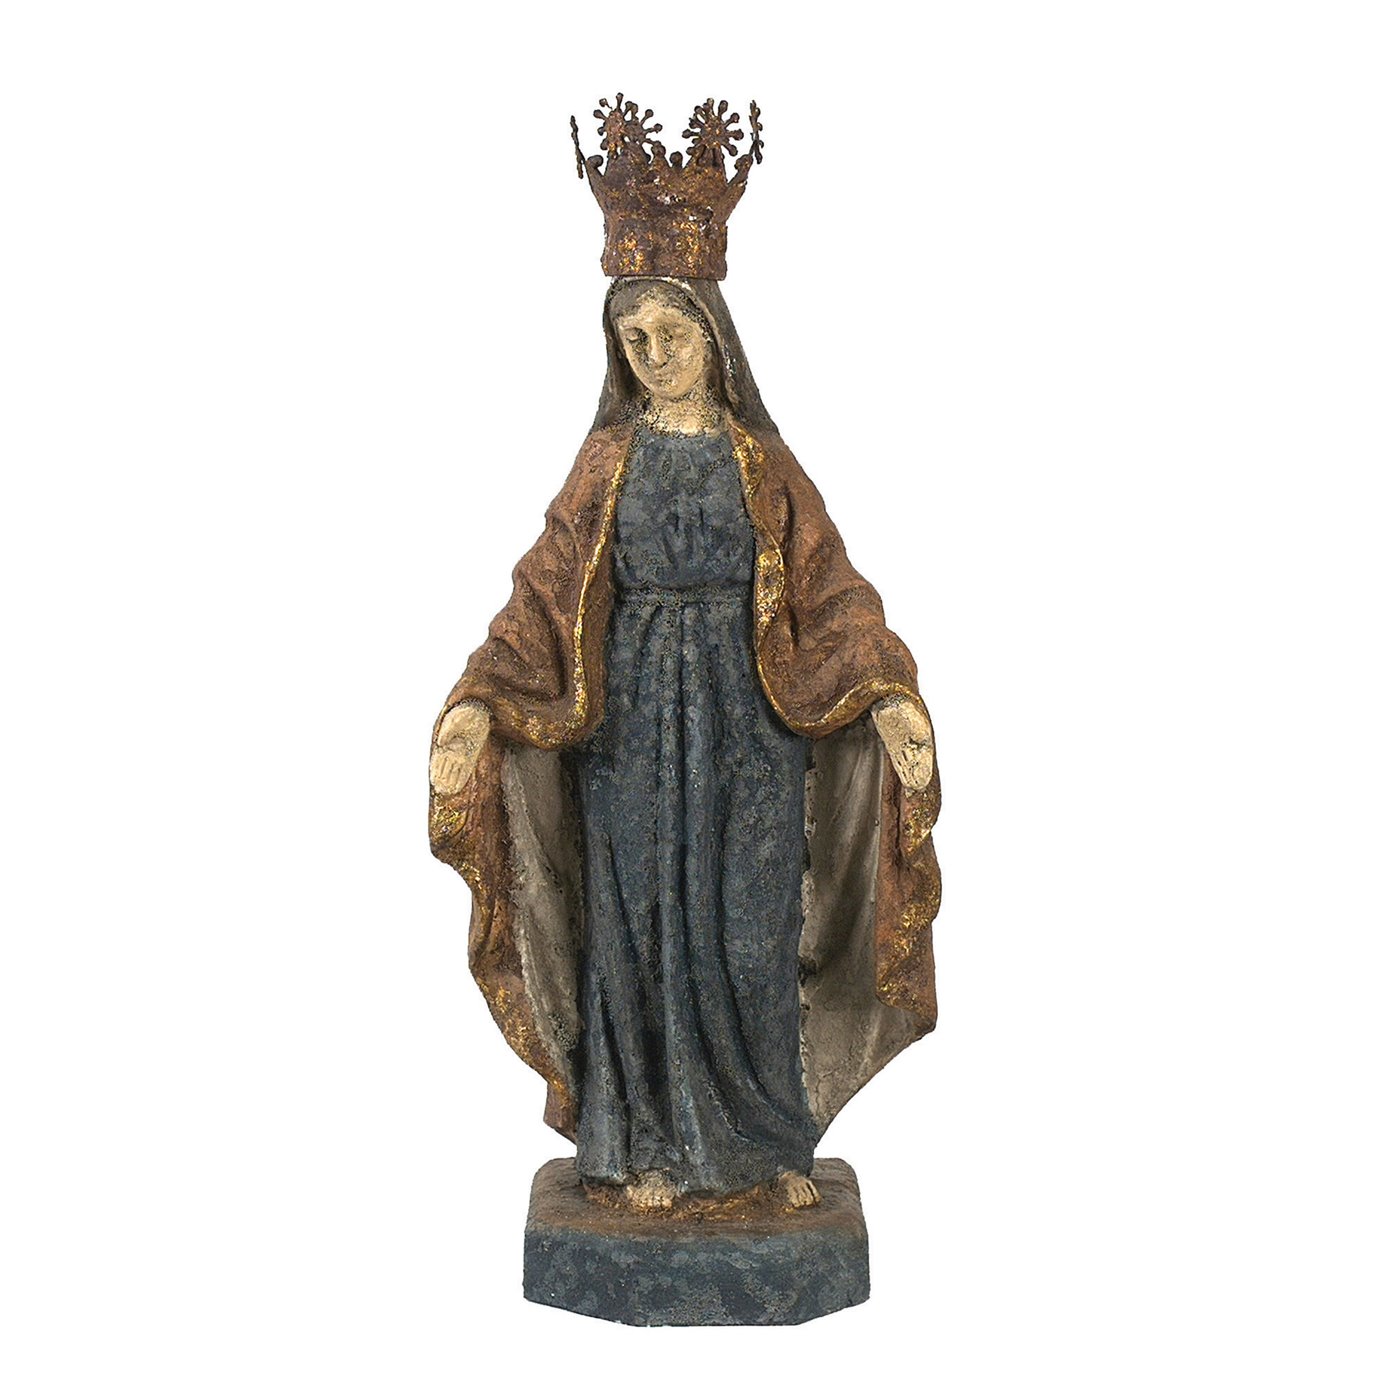 Virgin Mary Statue with Removable Crown